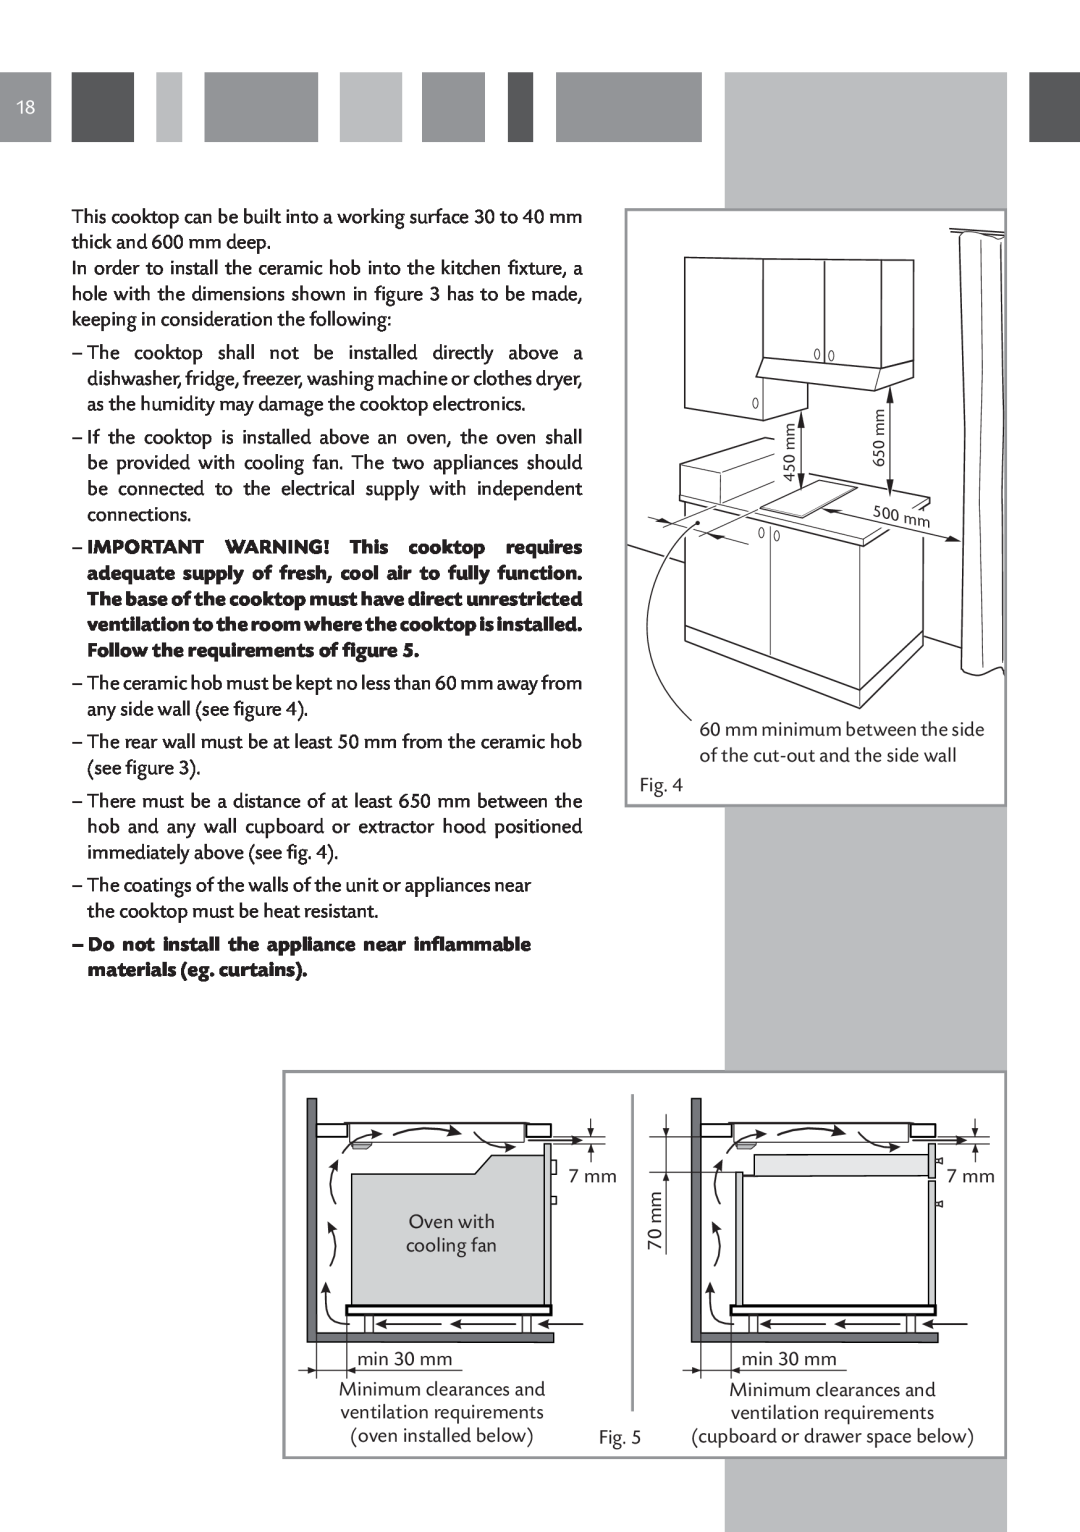 CDA HVN 32 manual Do not install the appliance near inflammable materials eg. curtains, of the cut-out and the side wall 